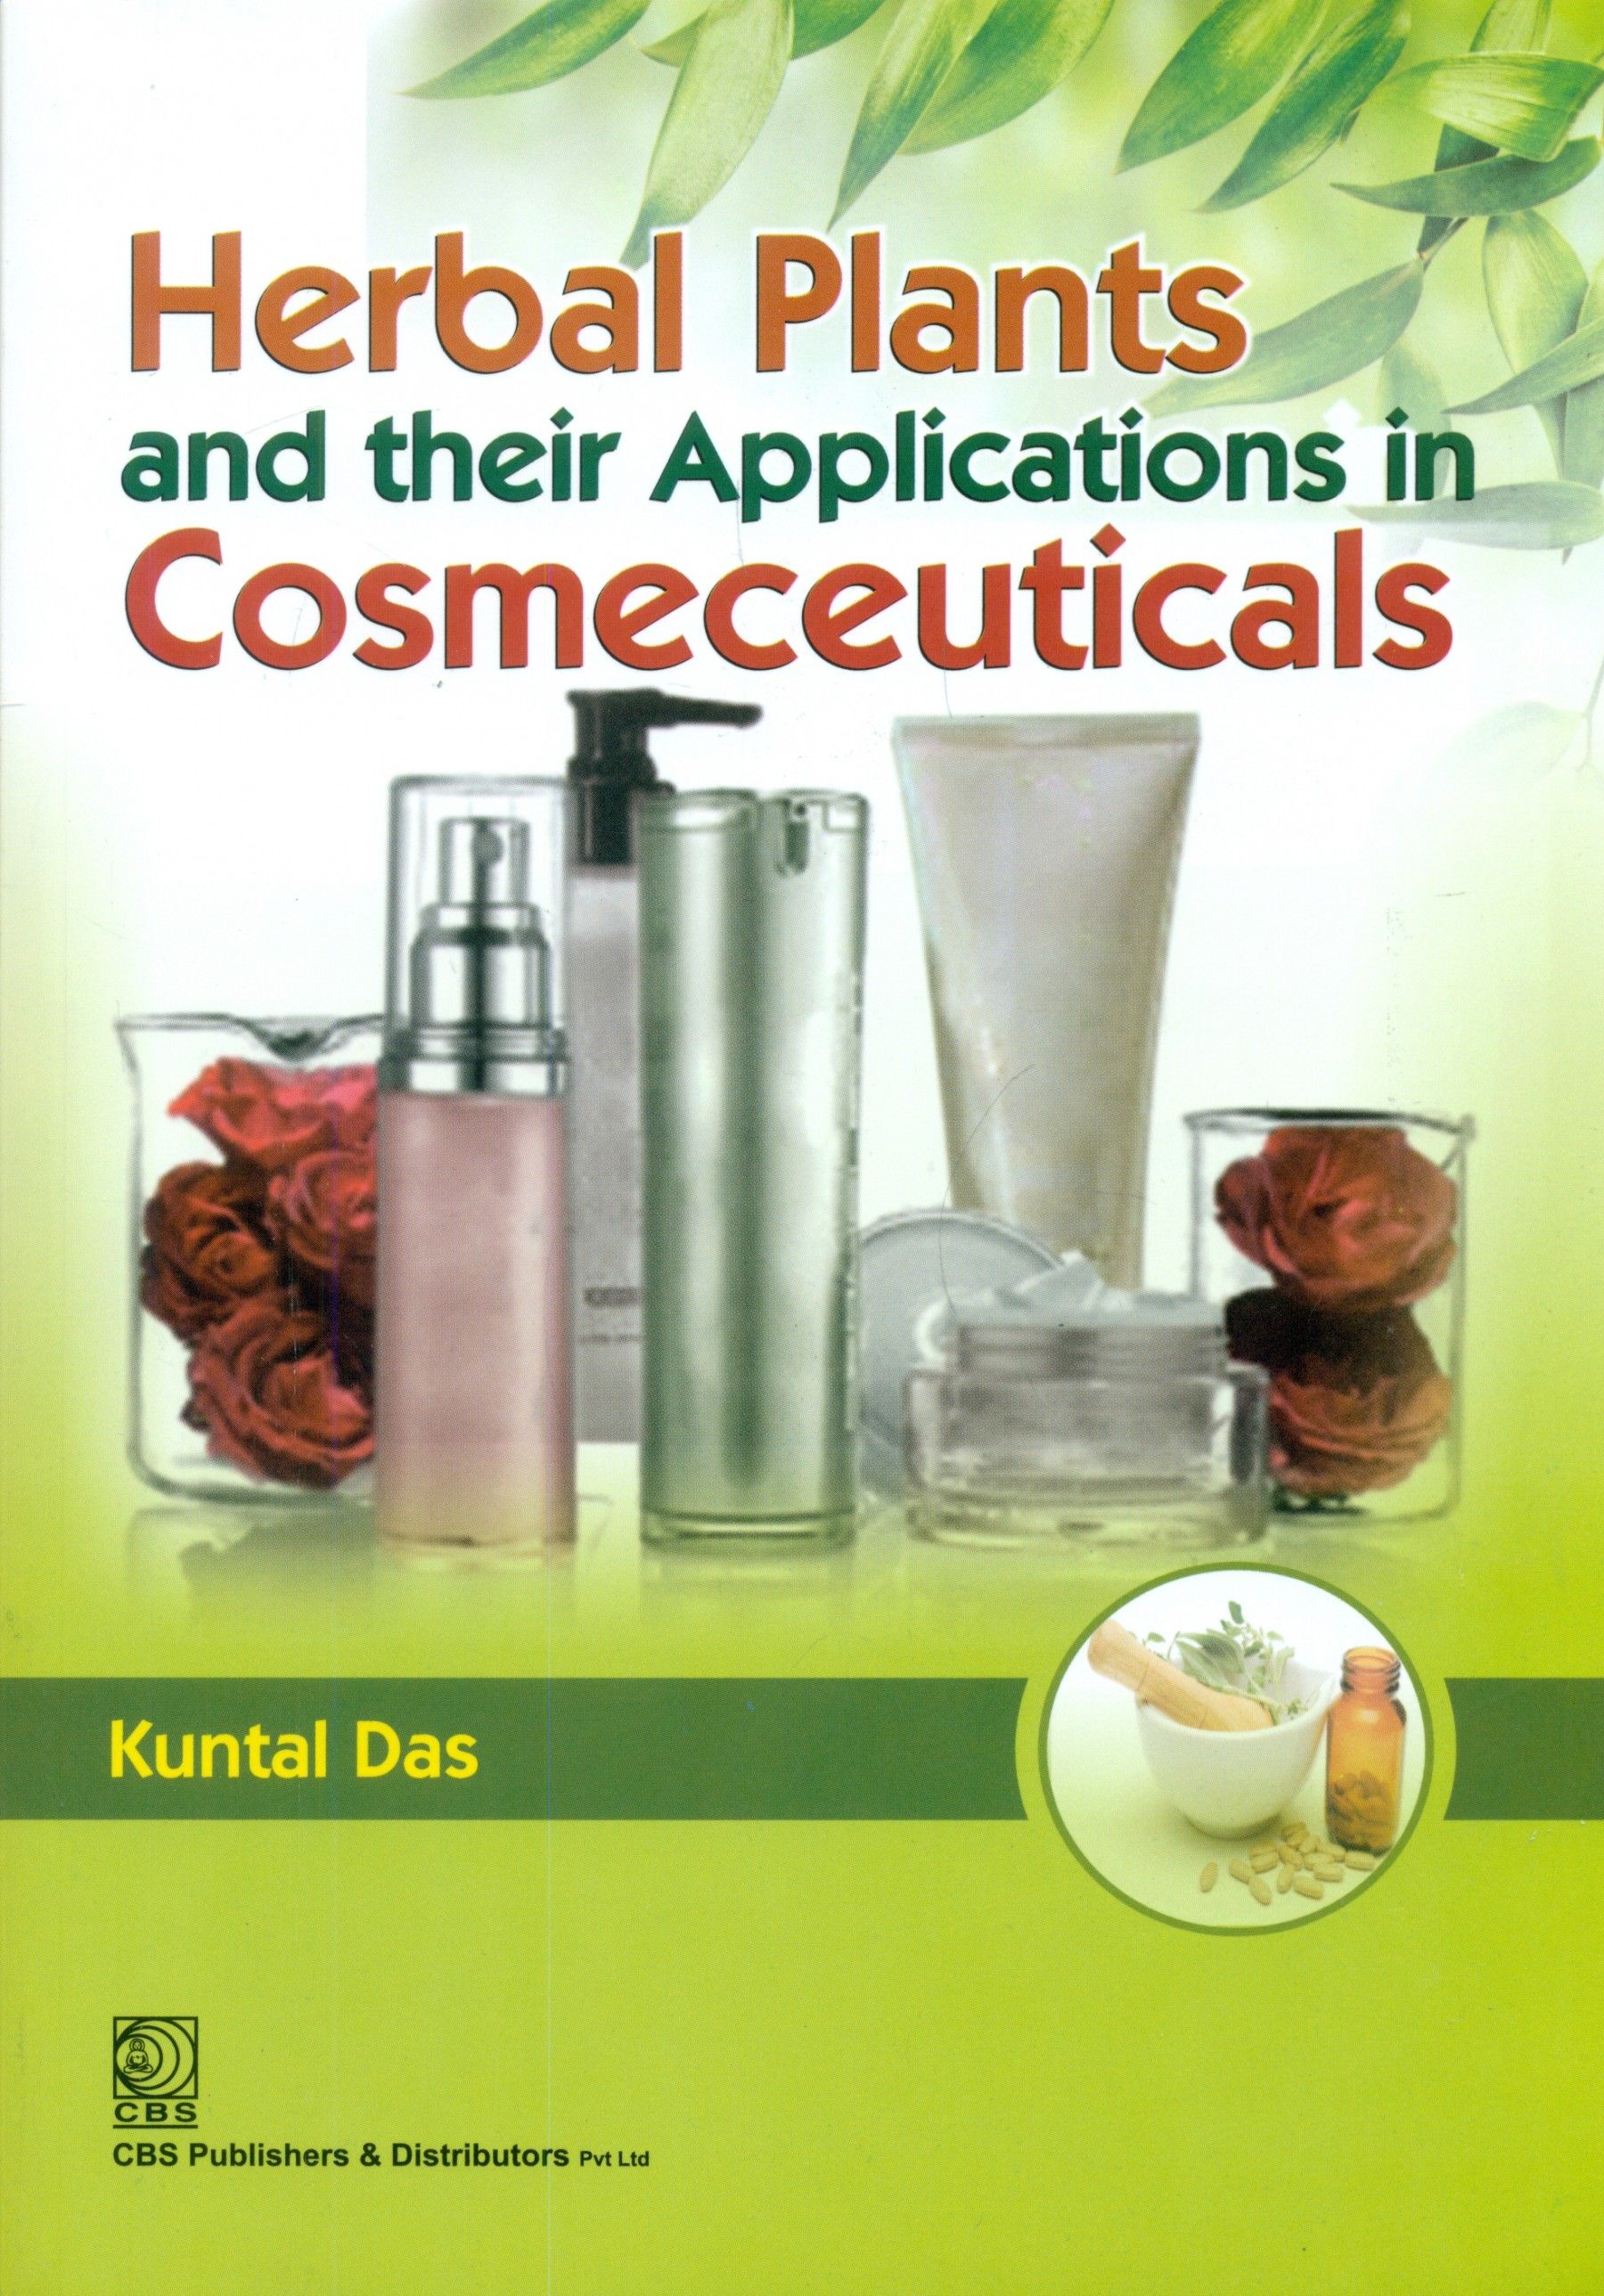 Herbal Plants and their Applications in Cosmeceuticals